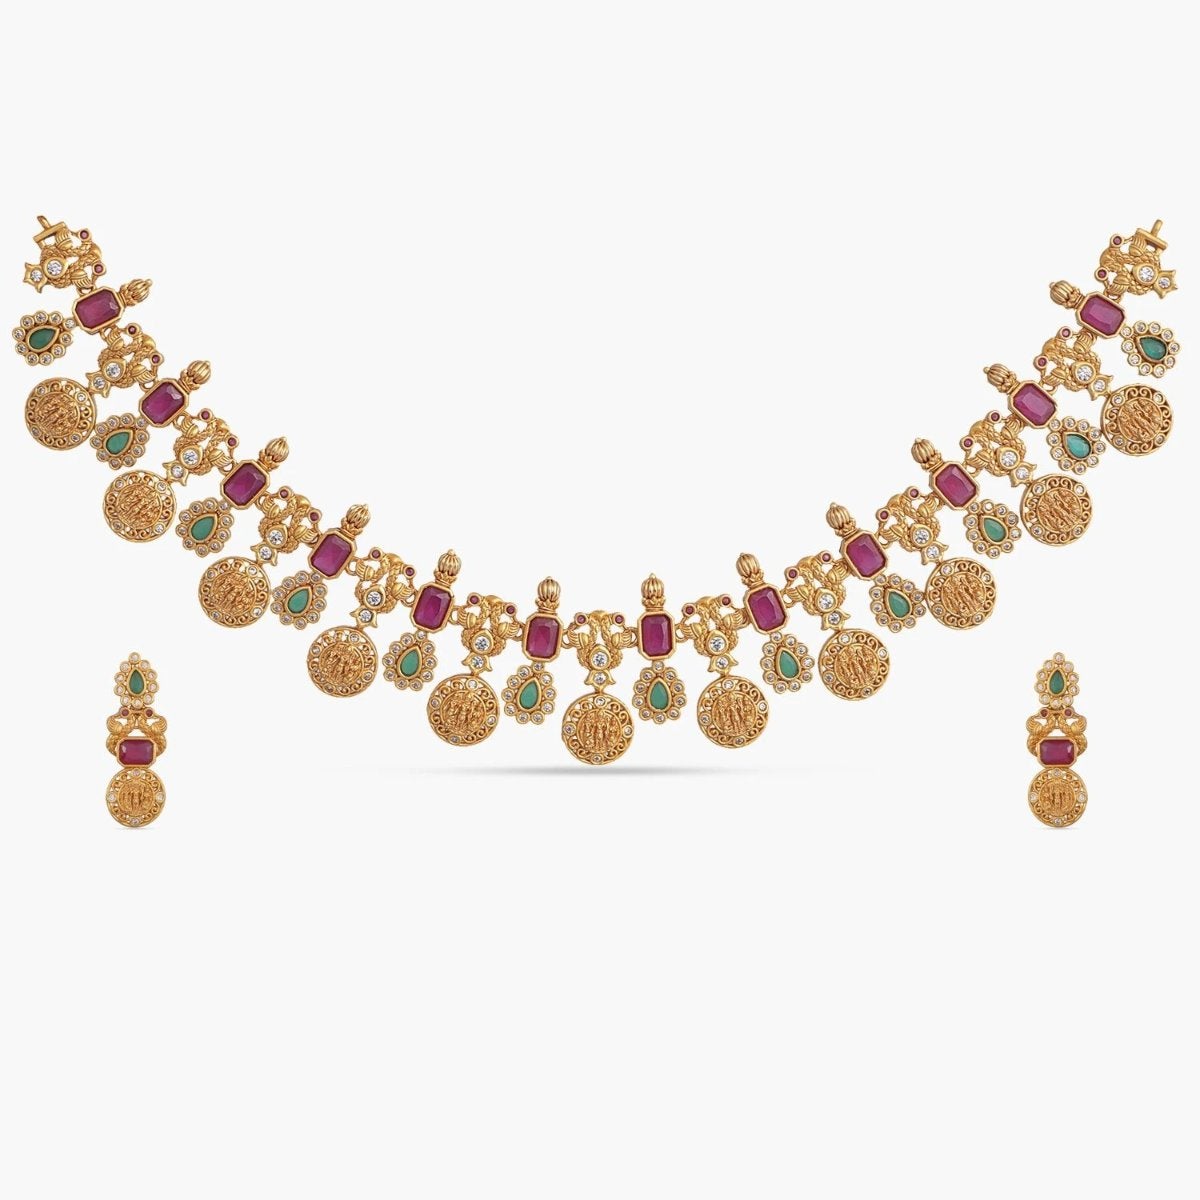 A picture of Indian artificial jewelry. It is a traditional necklace set with red and green gemstones, featuring Cubic Zirconia.